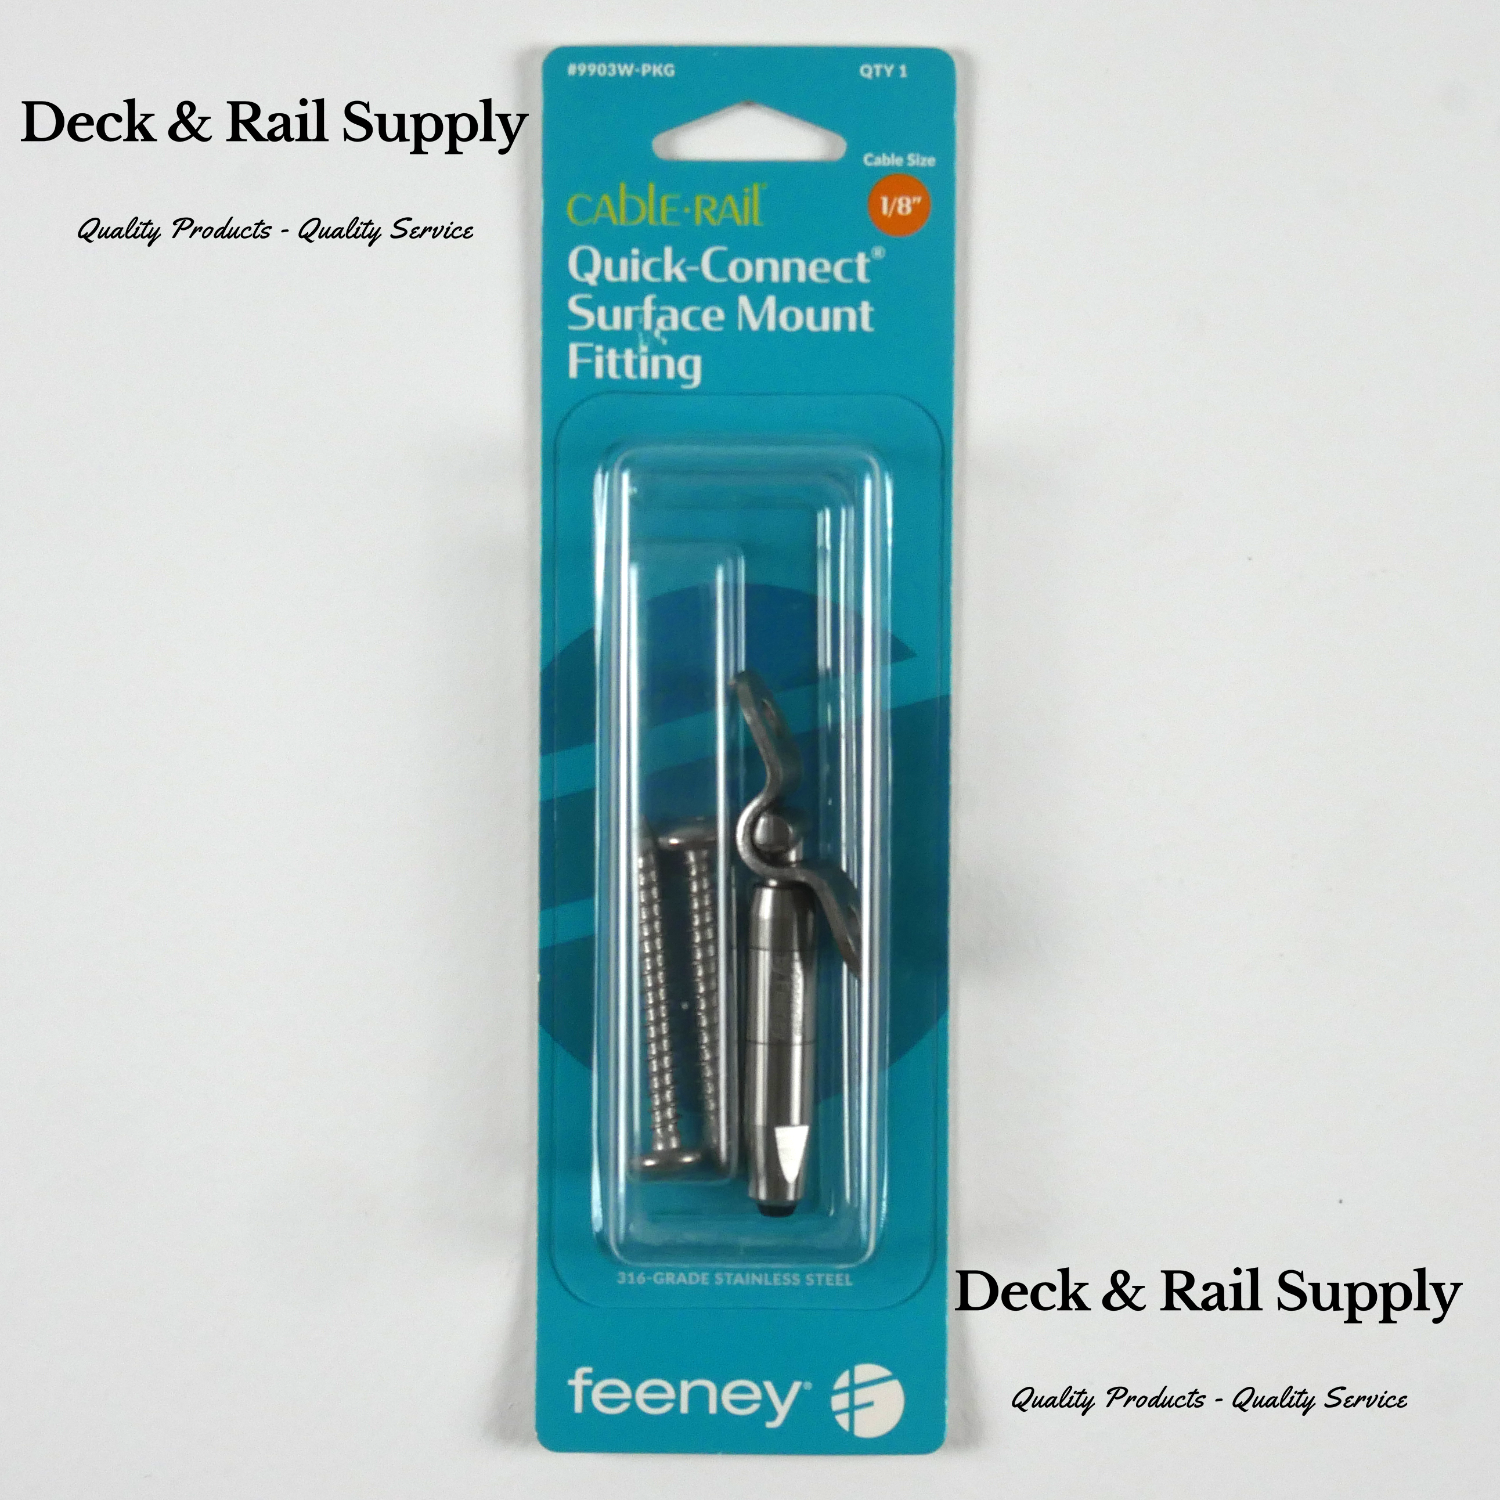 Feeney 9903 Fixed Surface Mount Quick-Connect Fitting attaches to wood surfaces and allows for a large angle range. Install the fitting with bracket vertical for stair railing, or install bracket horizontal for level angle swivel railing.